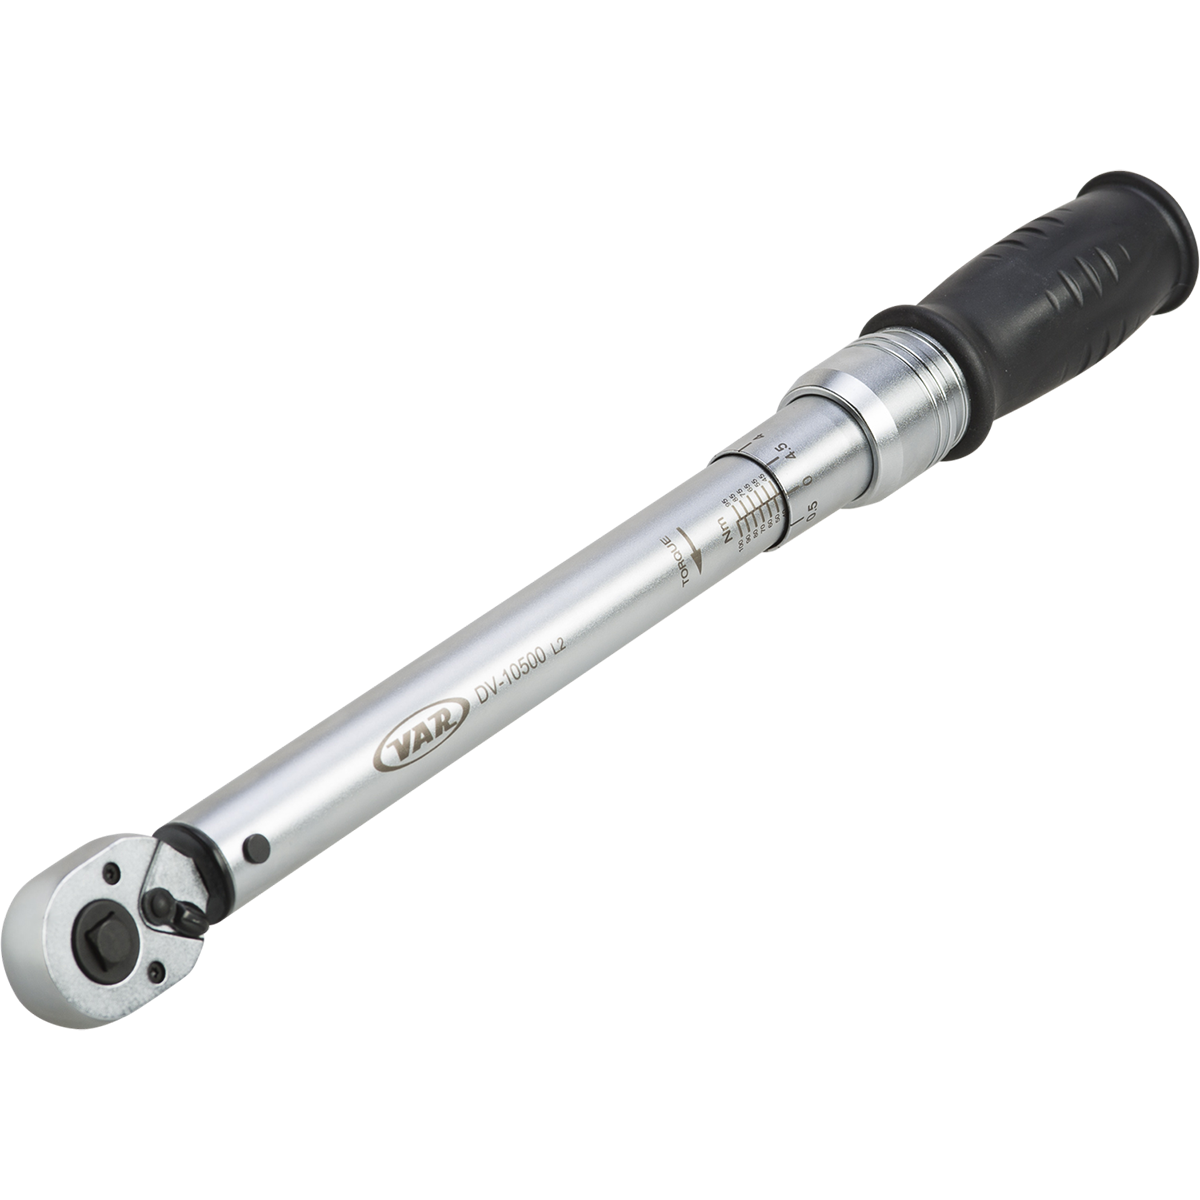 20-100Nm torque wrench with 3/8" drive